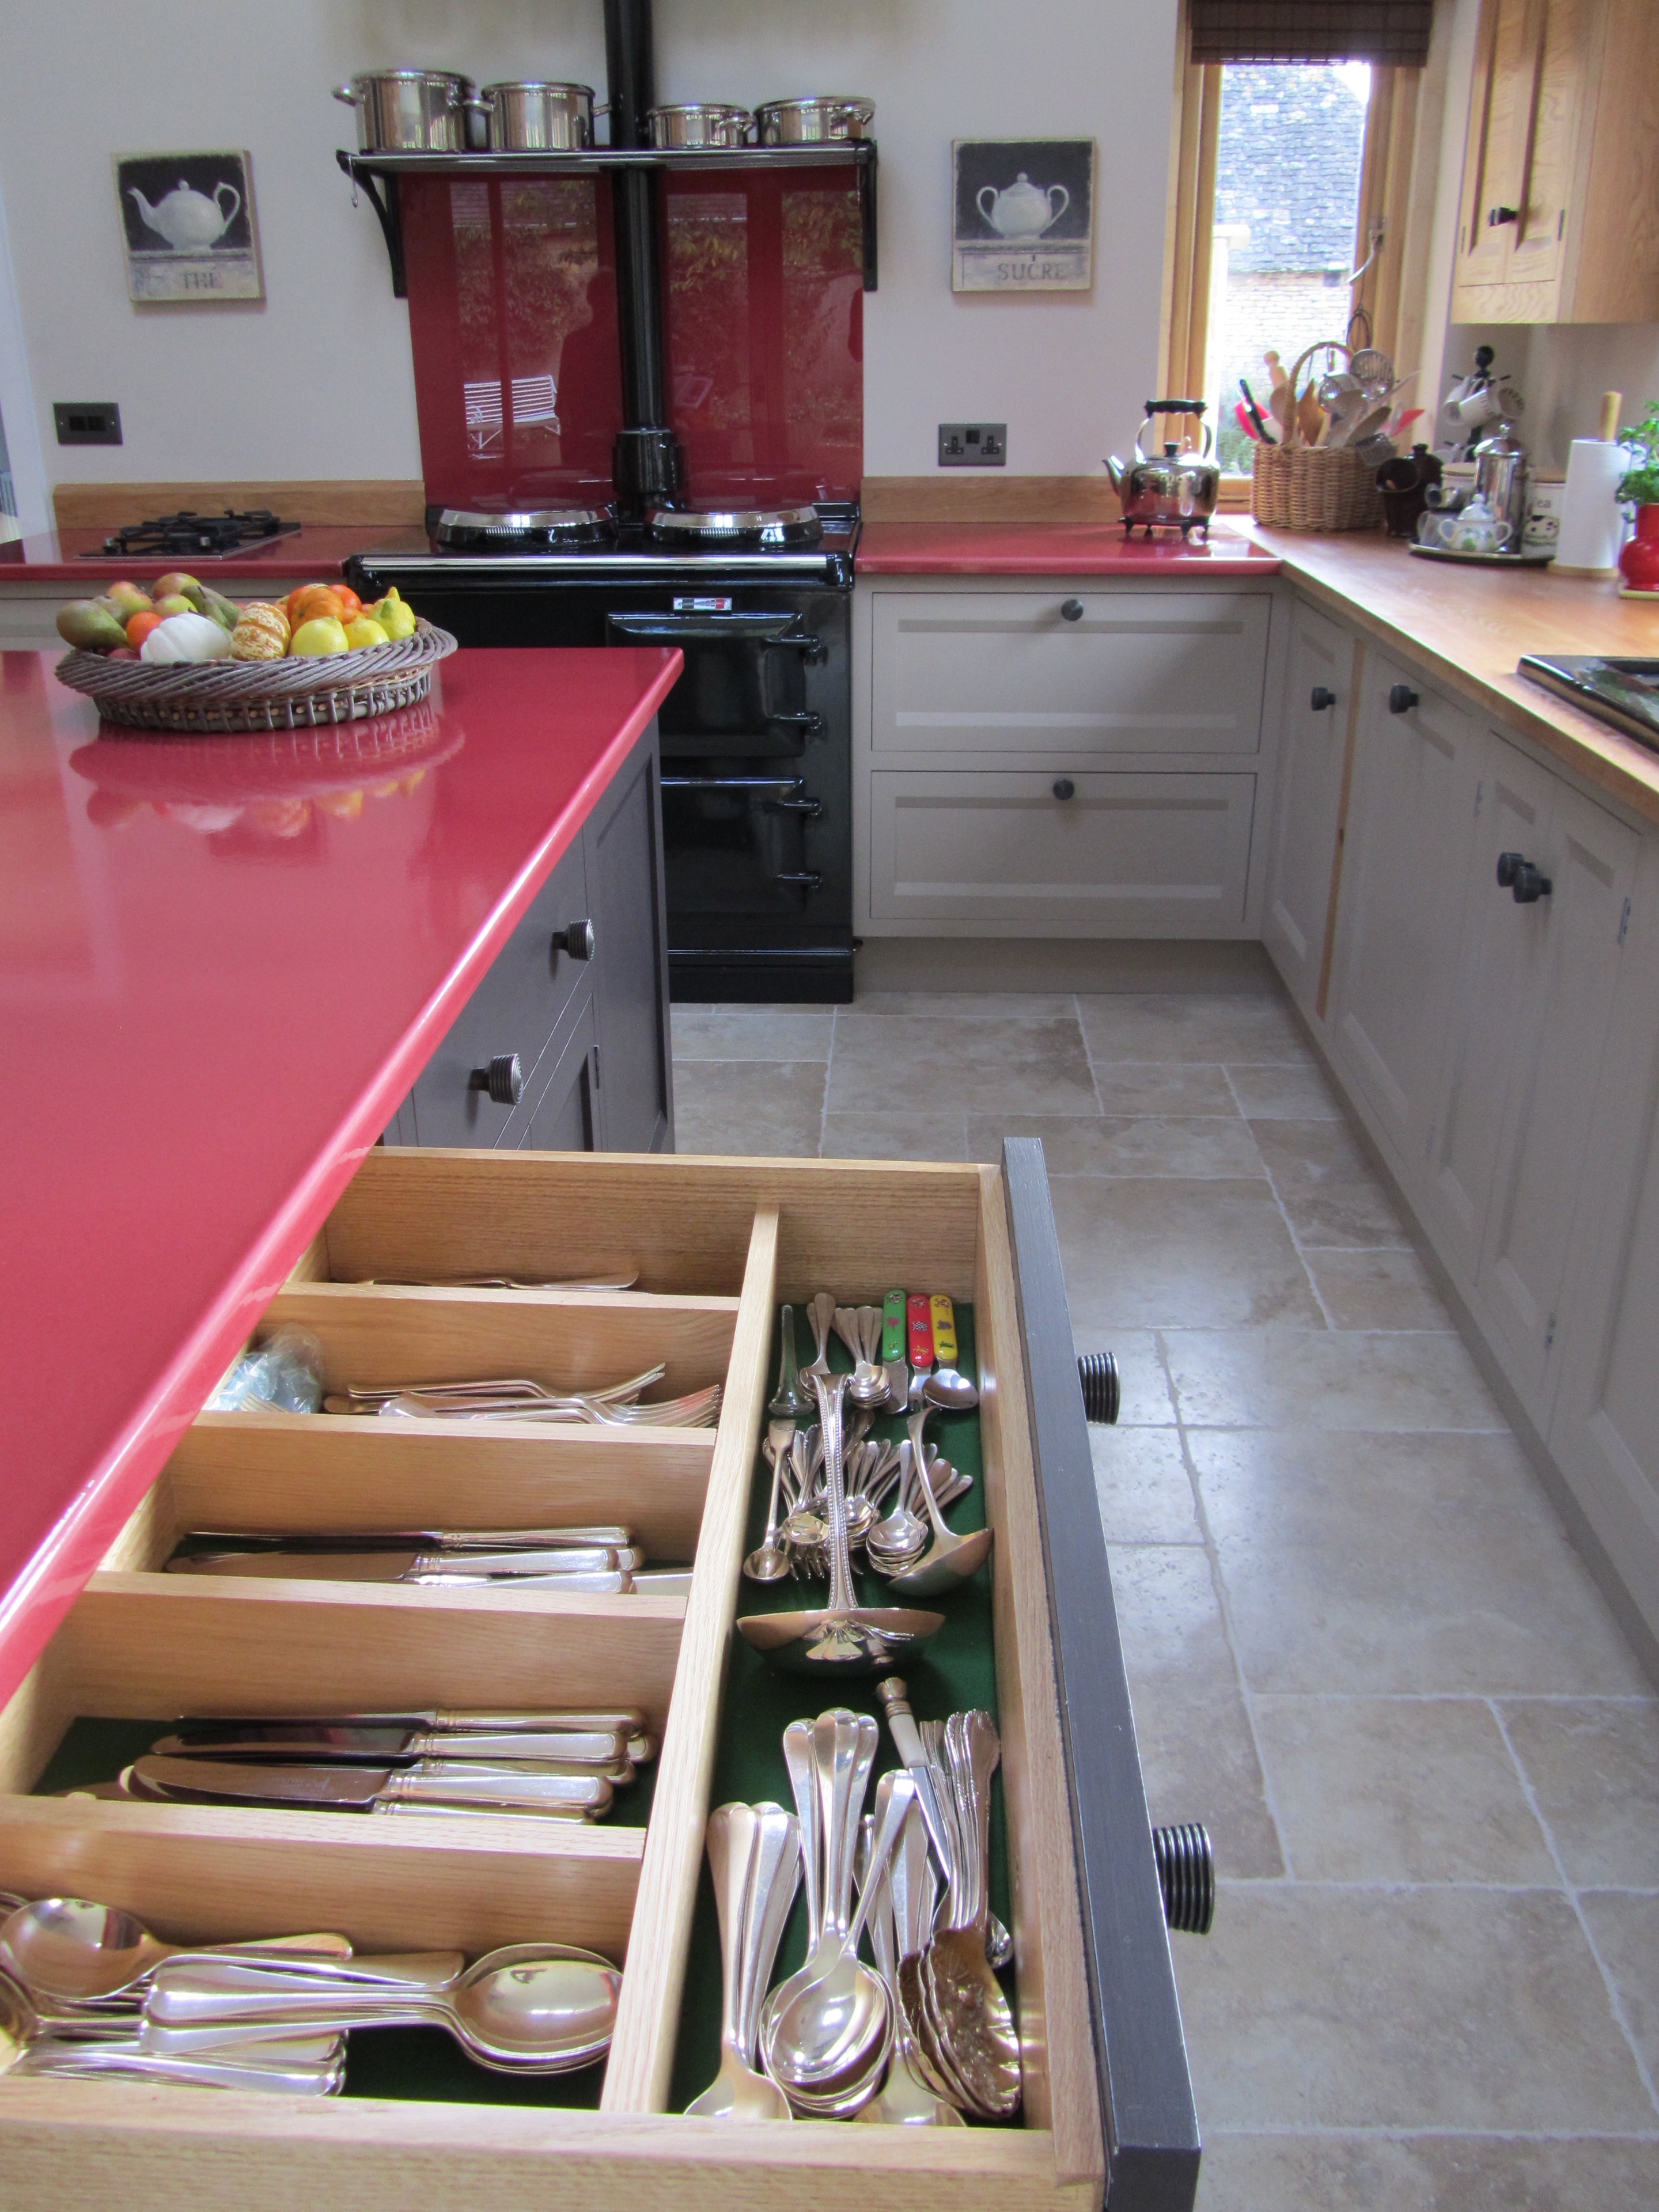 Kitchen island worktops with wow factor - Page 1 - Homes, Gardens and DIY - PistonHeads